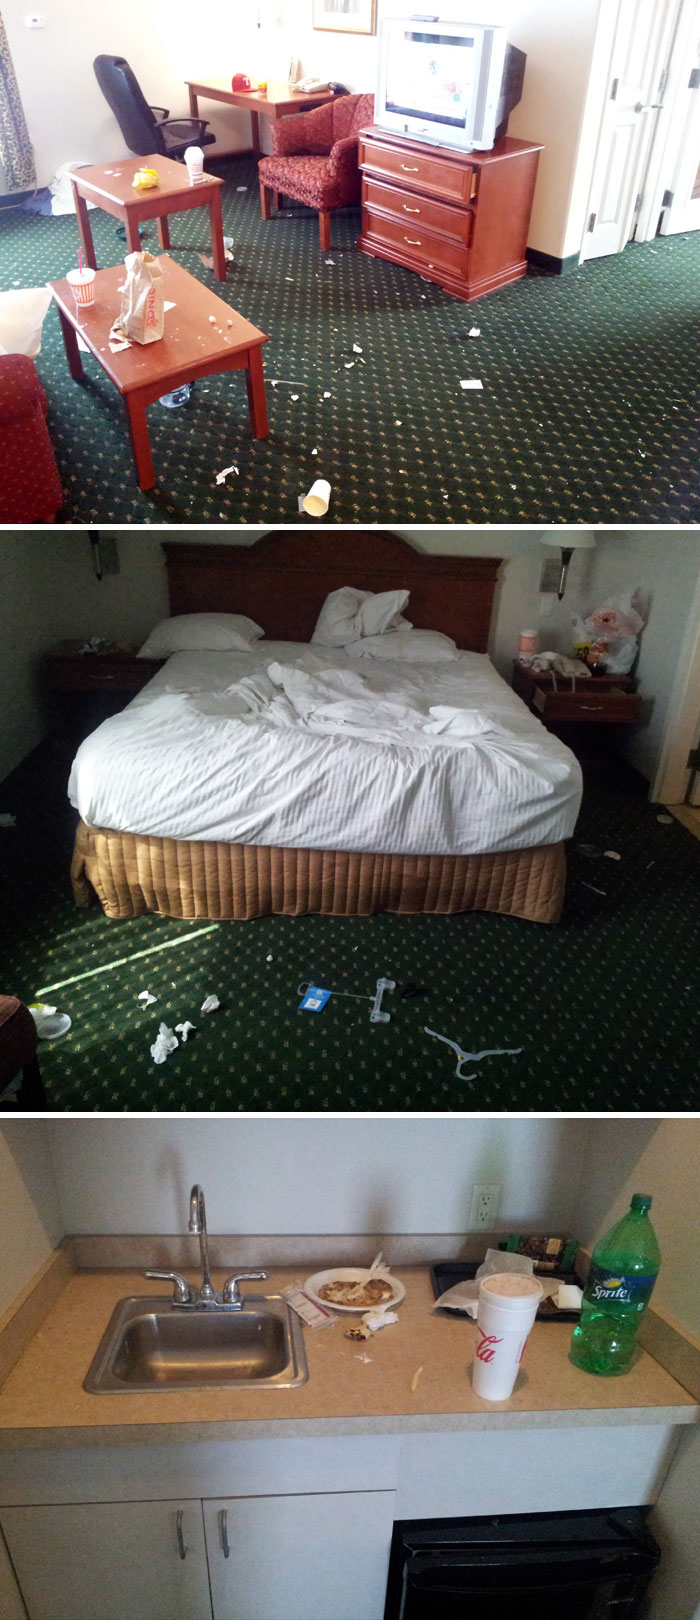 This Is The Room Of A Hotel Guest That Stayed For 3 Days. No Pets, No Kids. Just One Dude With A Mission To Be Disgusting